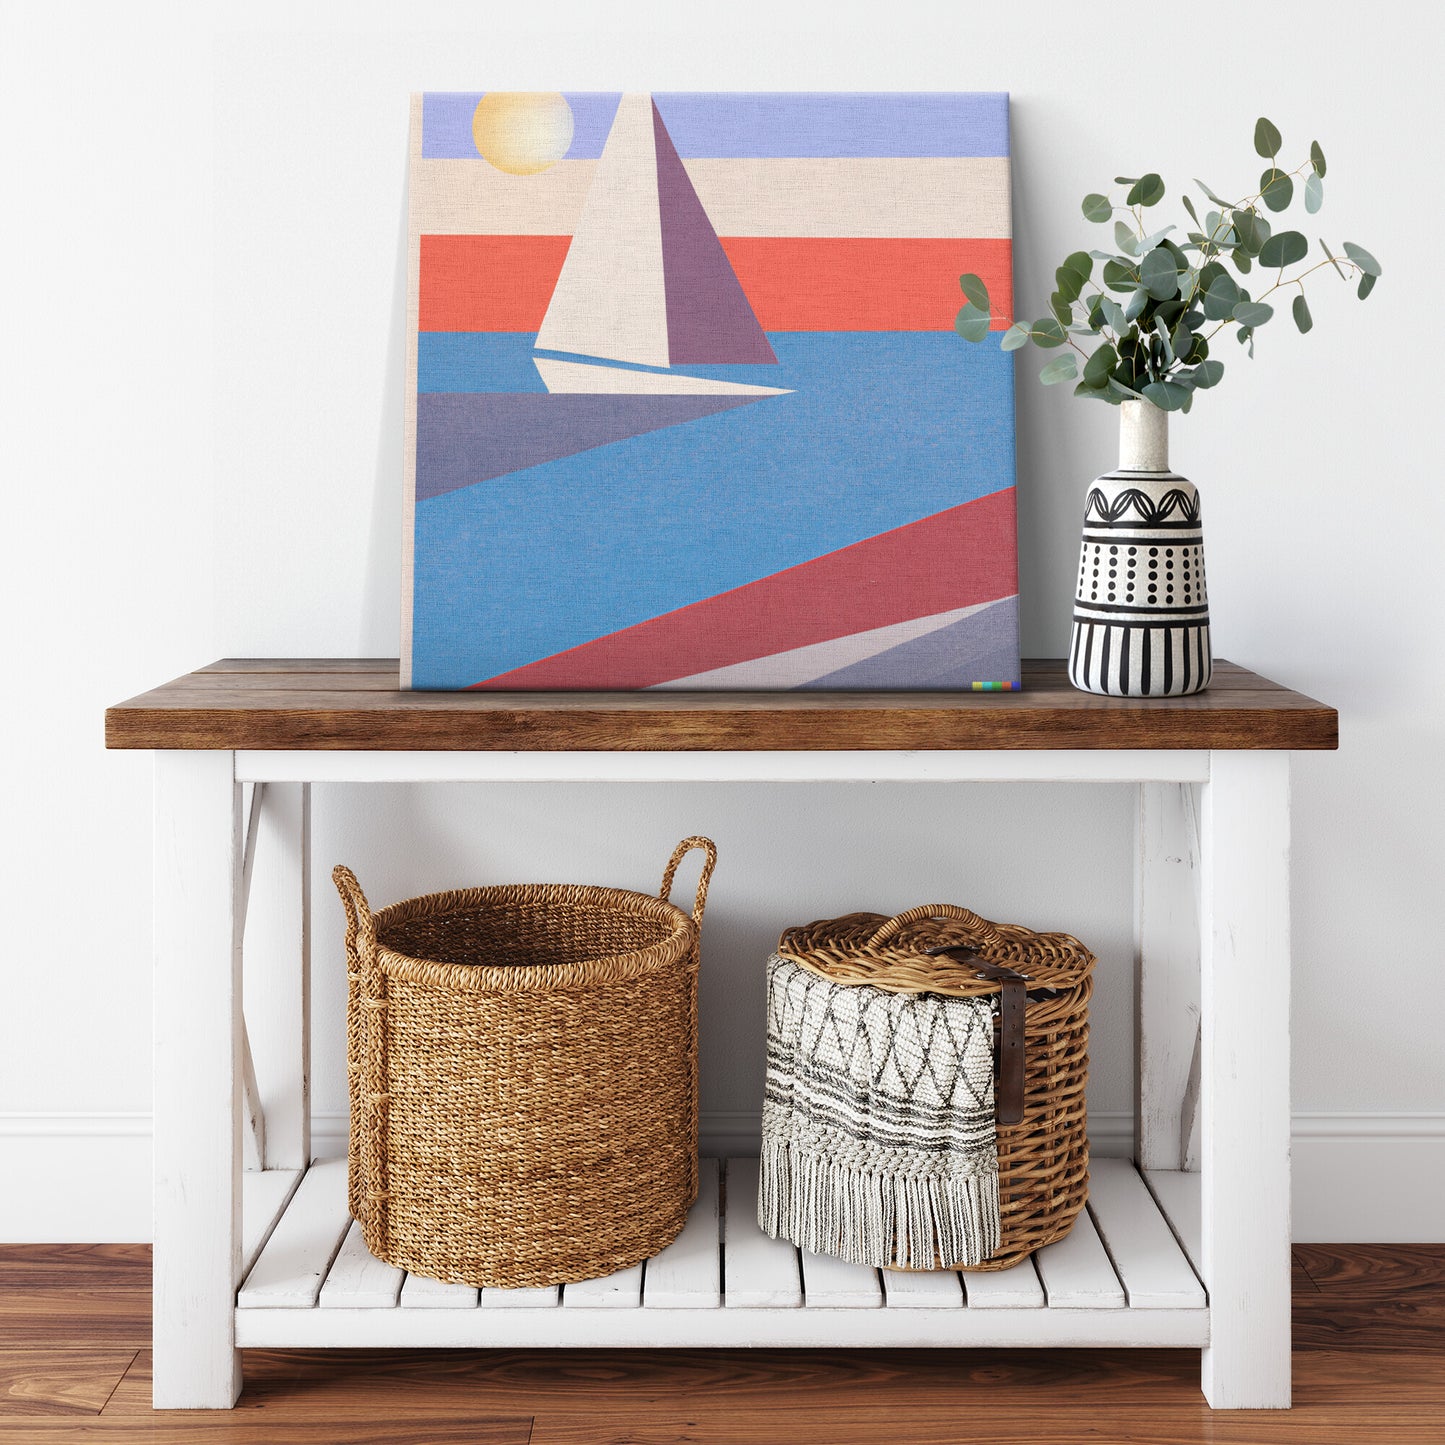 One-Of-A-Kind, NFT Backed, Mid Century Modern Painting of a Sailboat